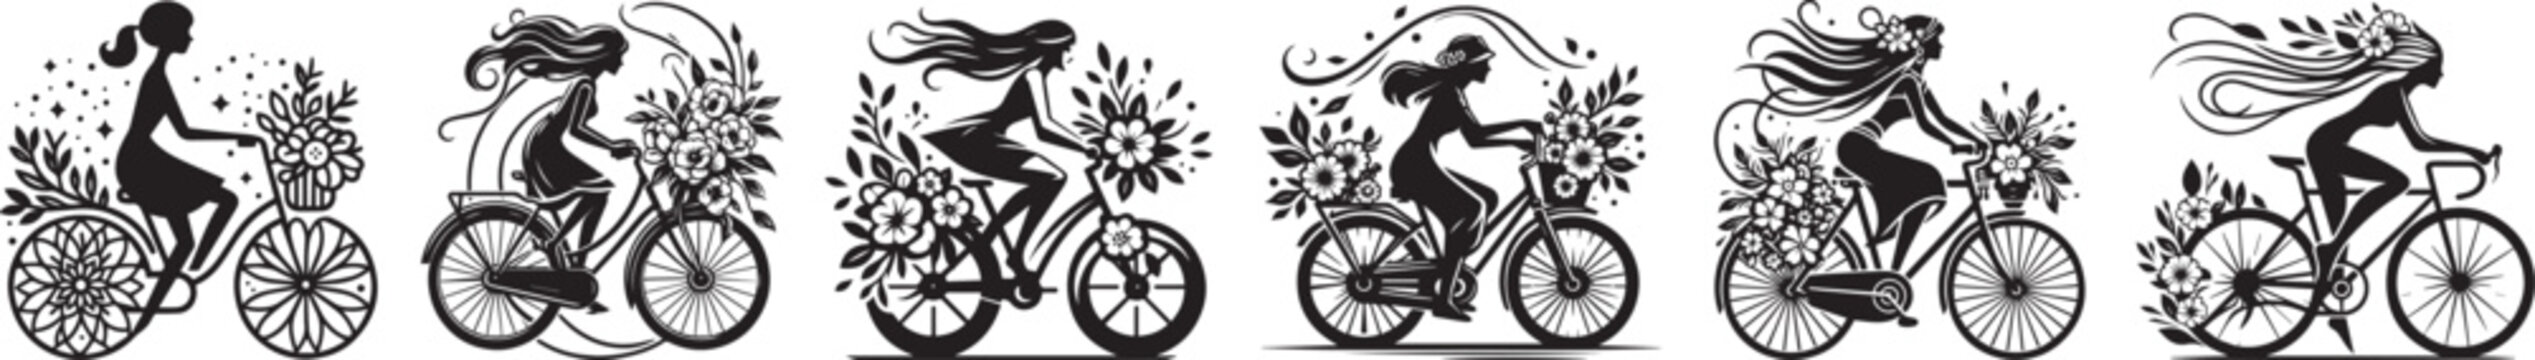 Girls on bikes decorated with flowers, black and white vector set collection